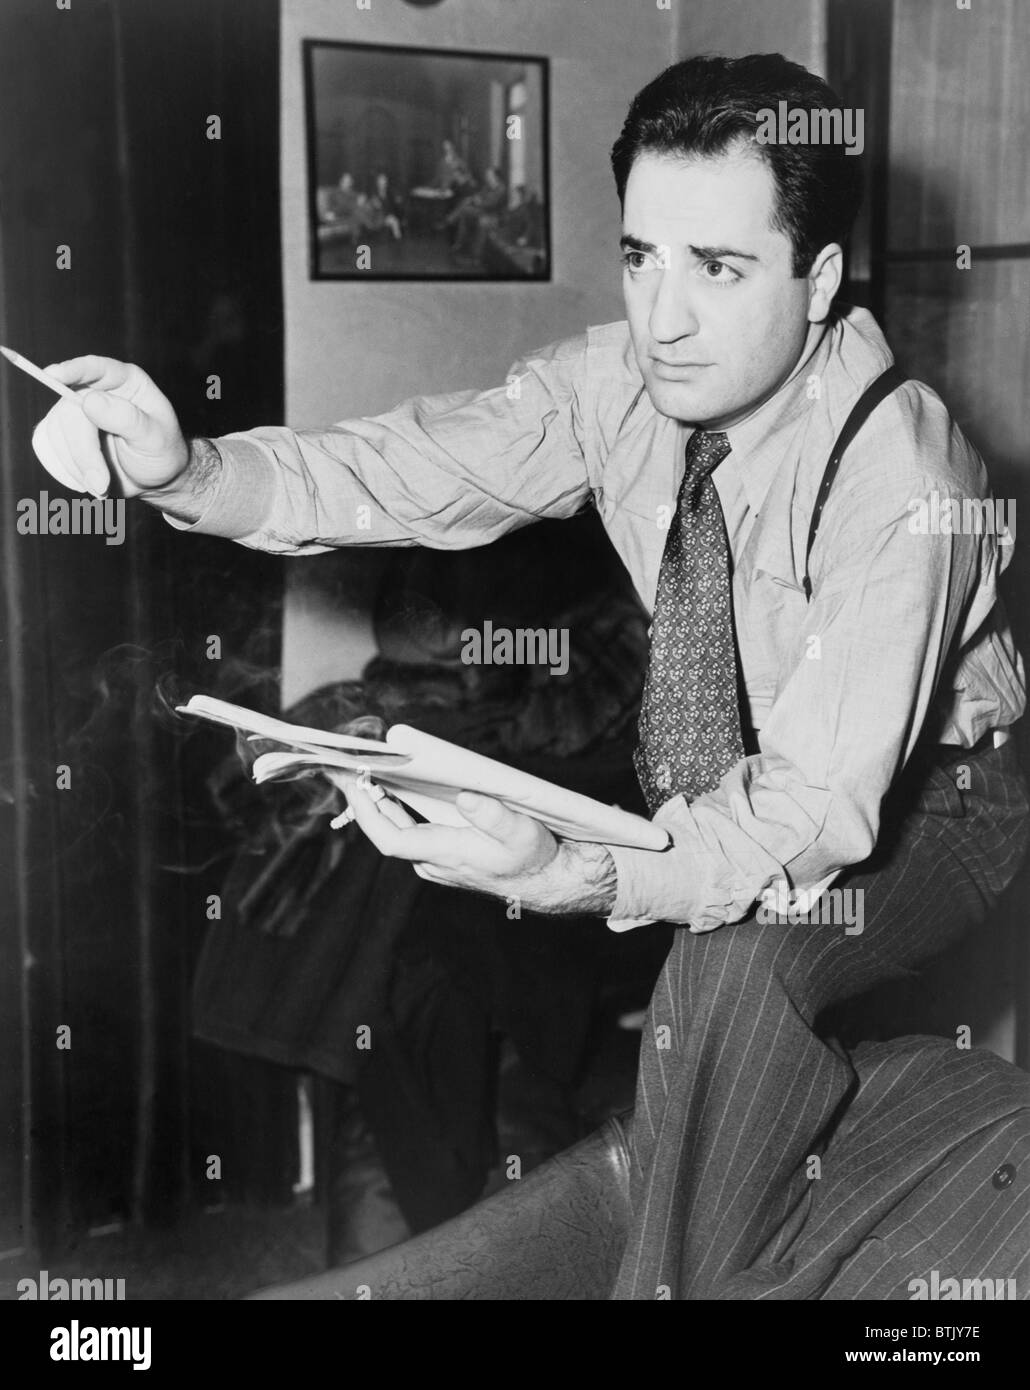 William Saroyan (1908-1981) American novelist and playwright won fame in the 1930's. His 1939 play, 'The Time of Your Life,' received the Pulitzer Prize and was made into a 1948 movie starring James Cagney. 1940. Stock Photo